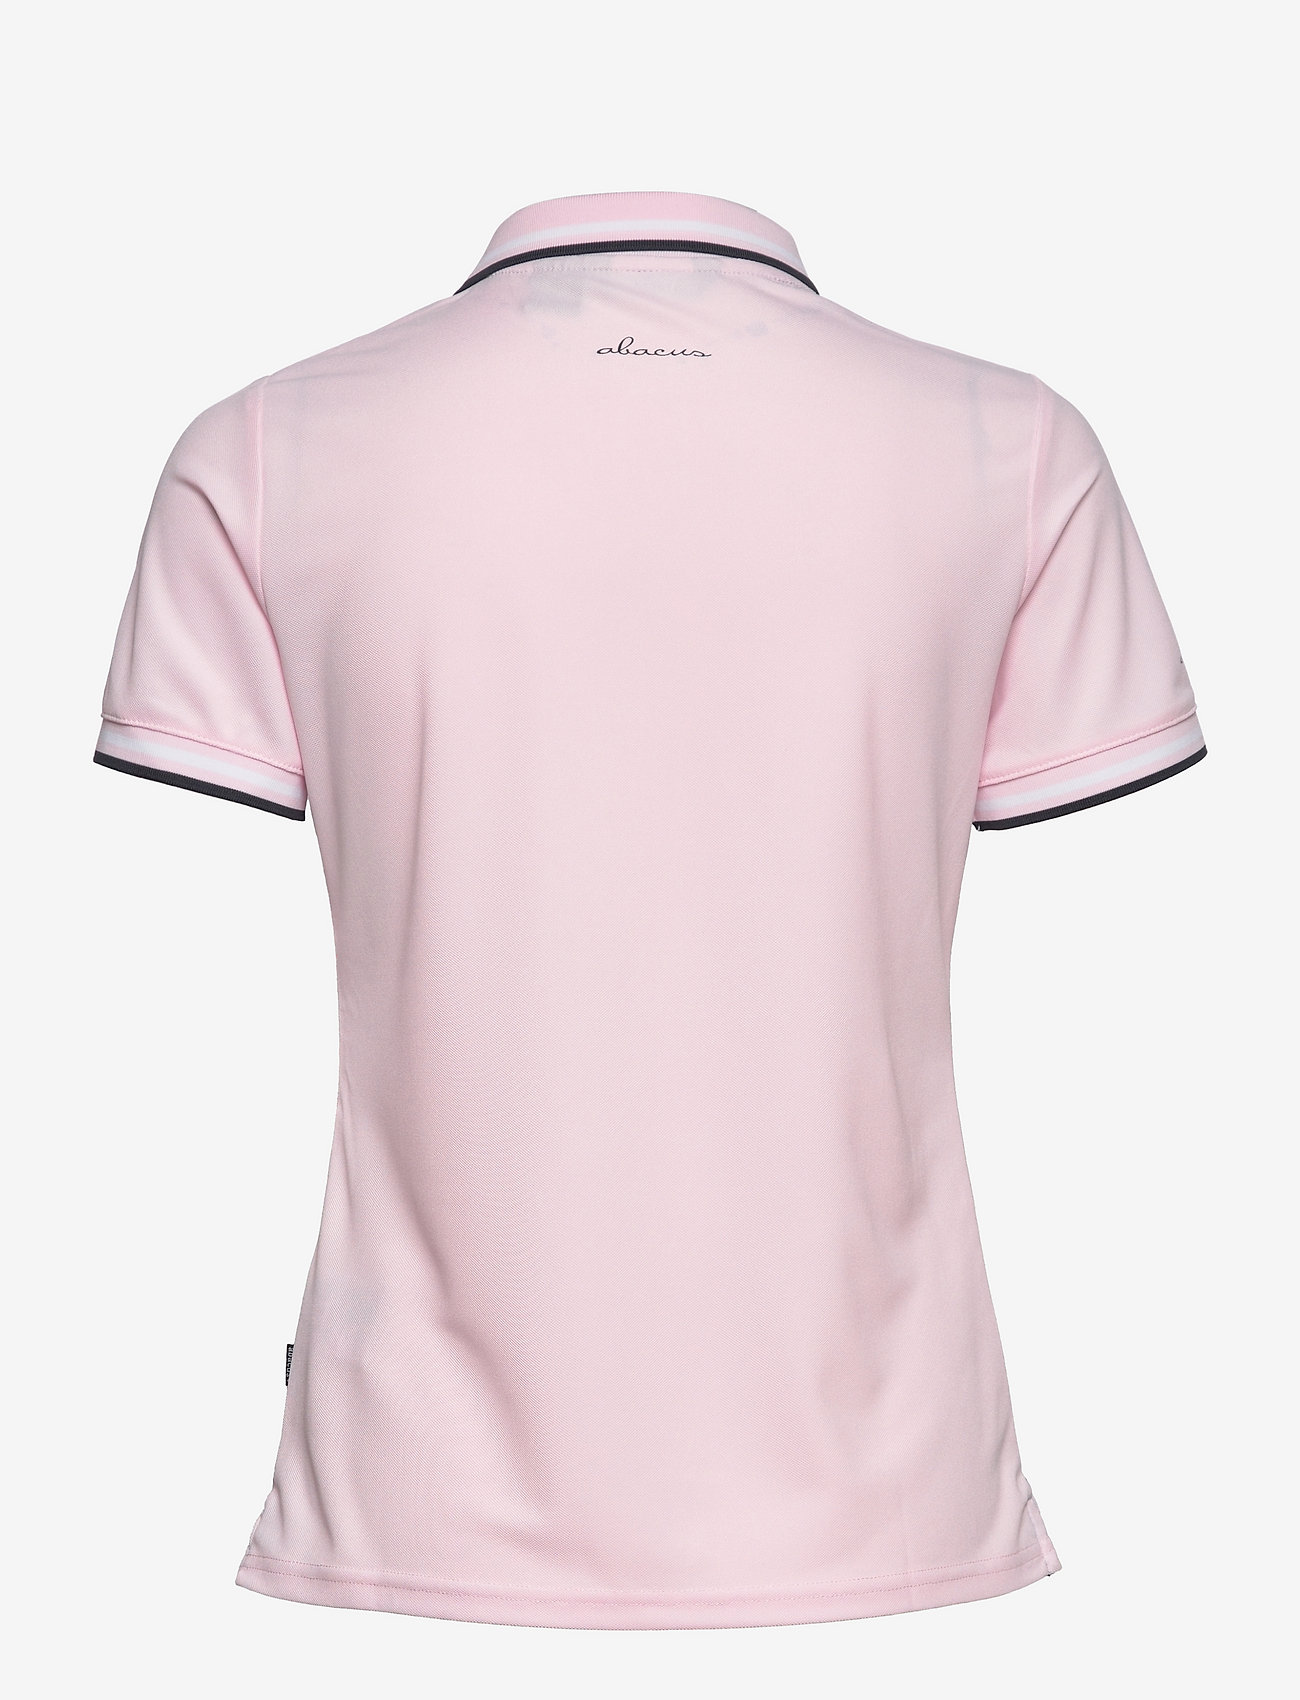 Abacus - Lds Pines polo - laveste priser - lt.pink - 1